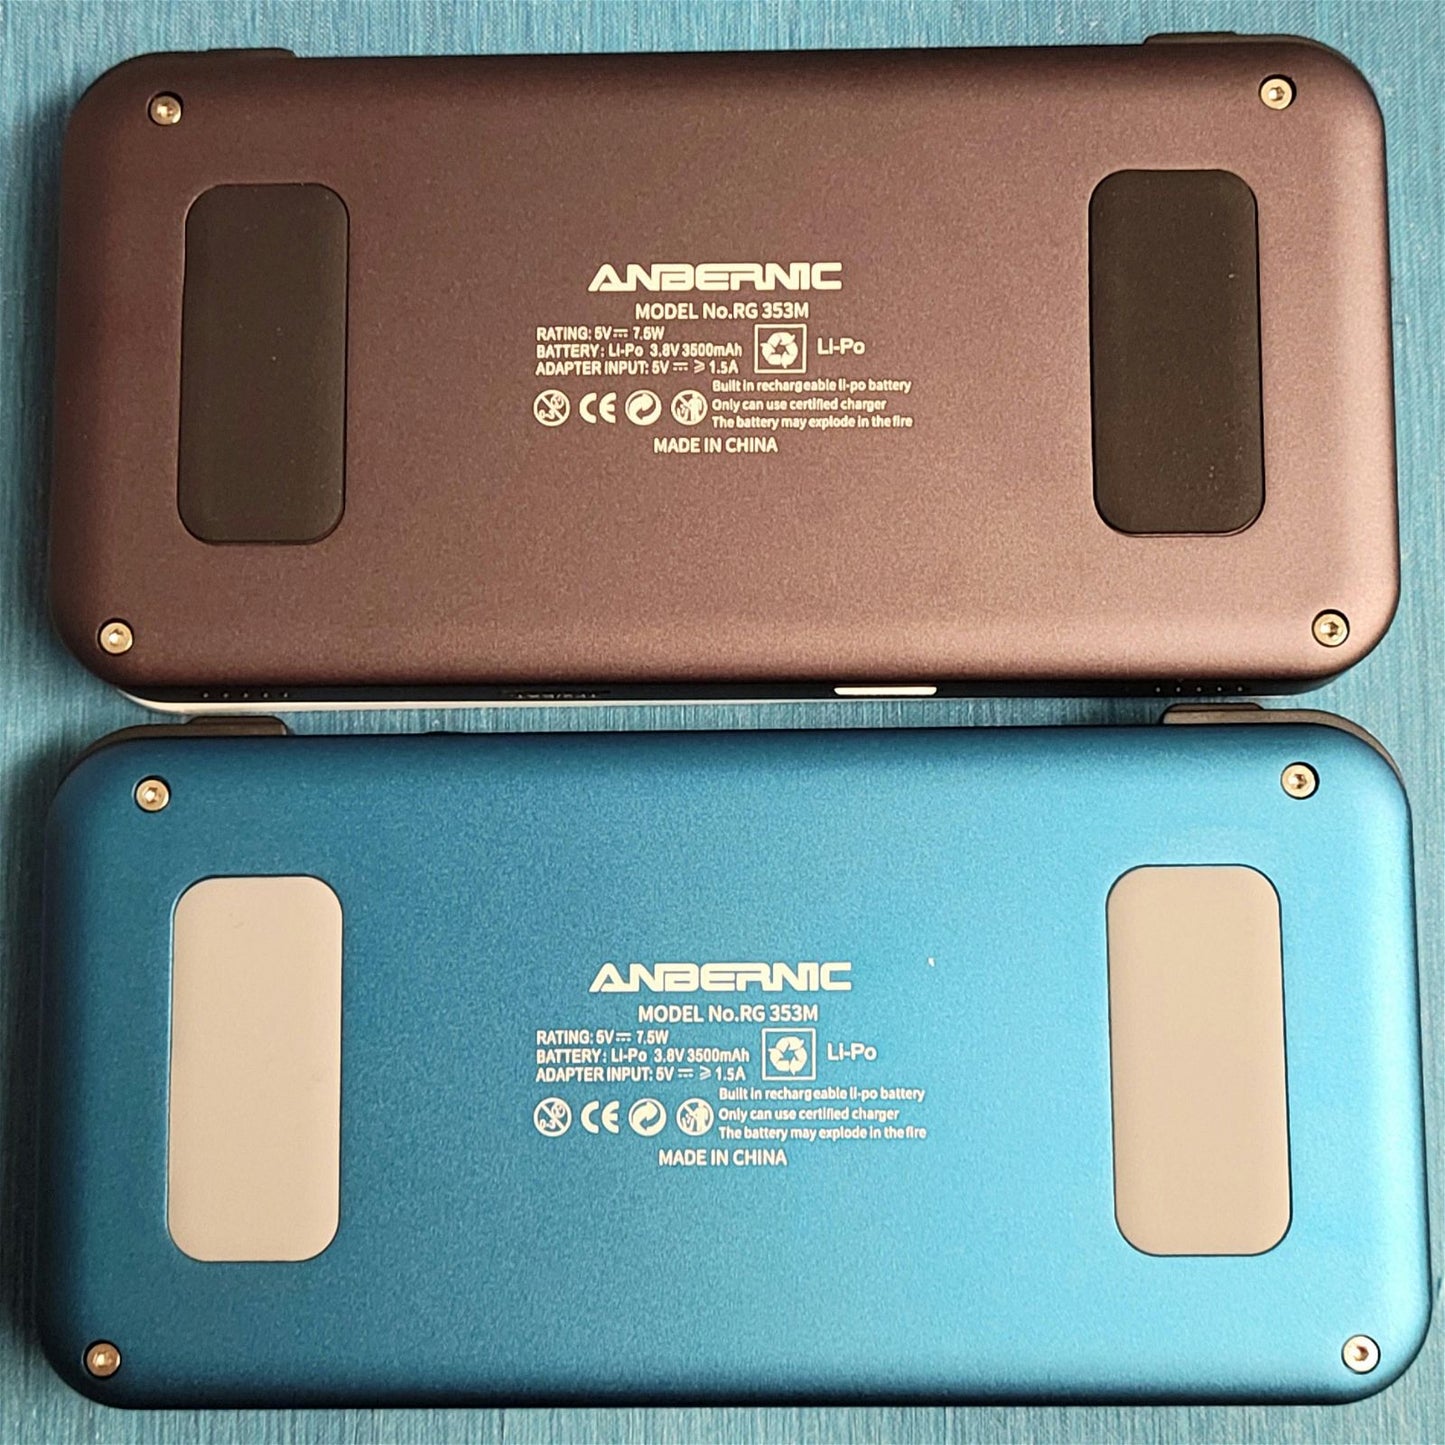 New Anbernic RG353M custom, configured Linux OS & Android, 256GB SD portable gaming handheld console - Arcadeclassics